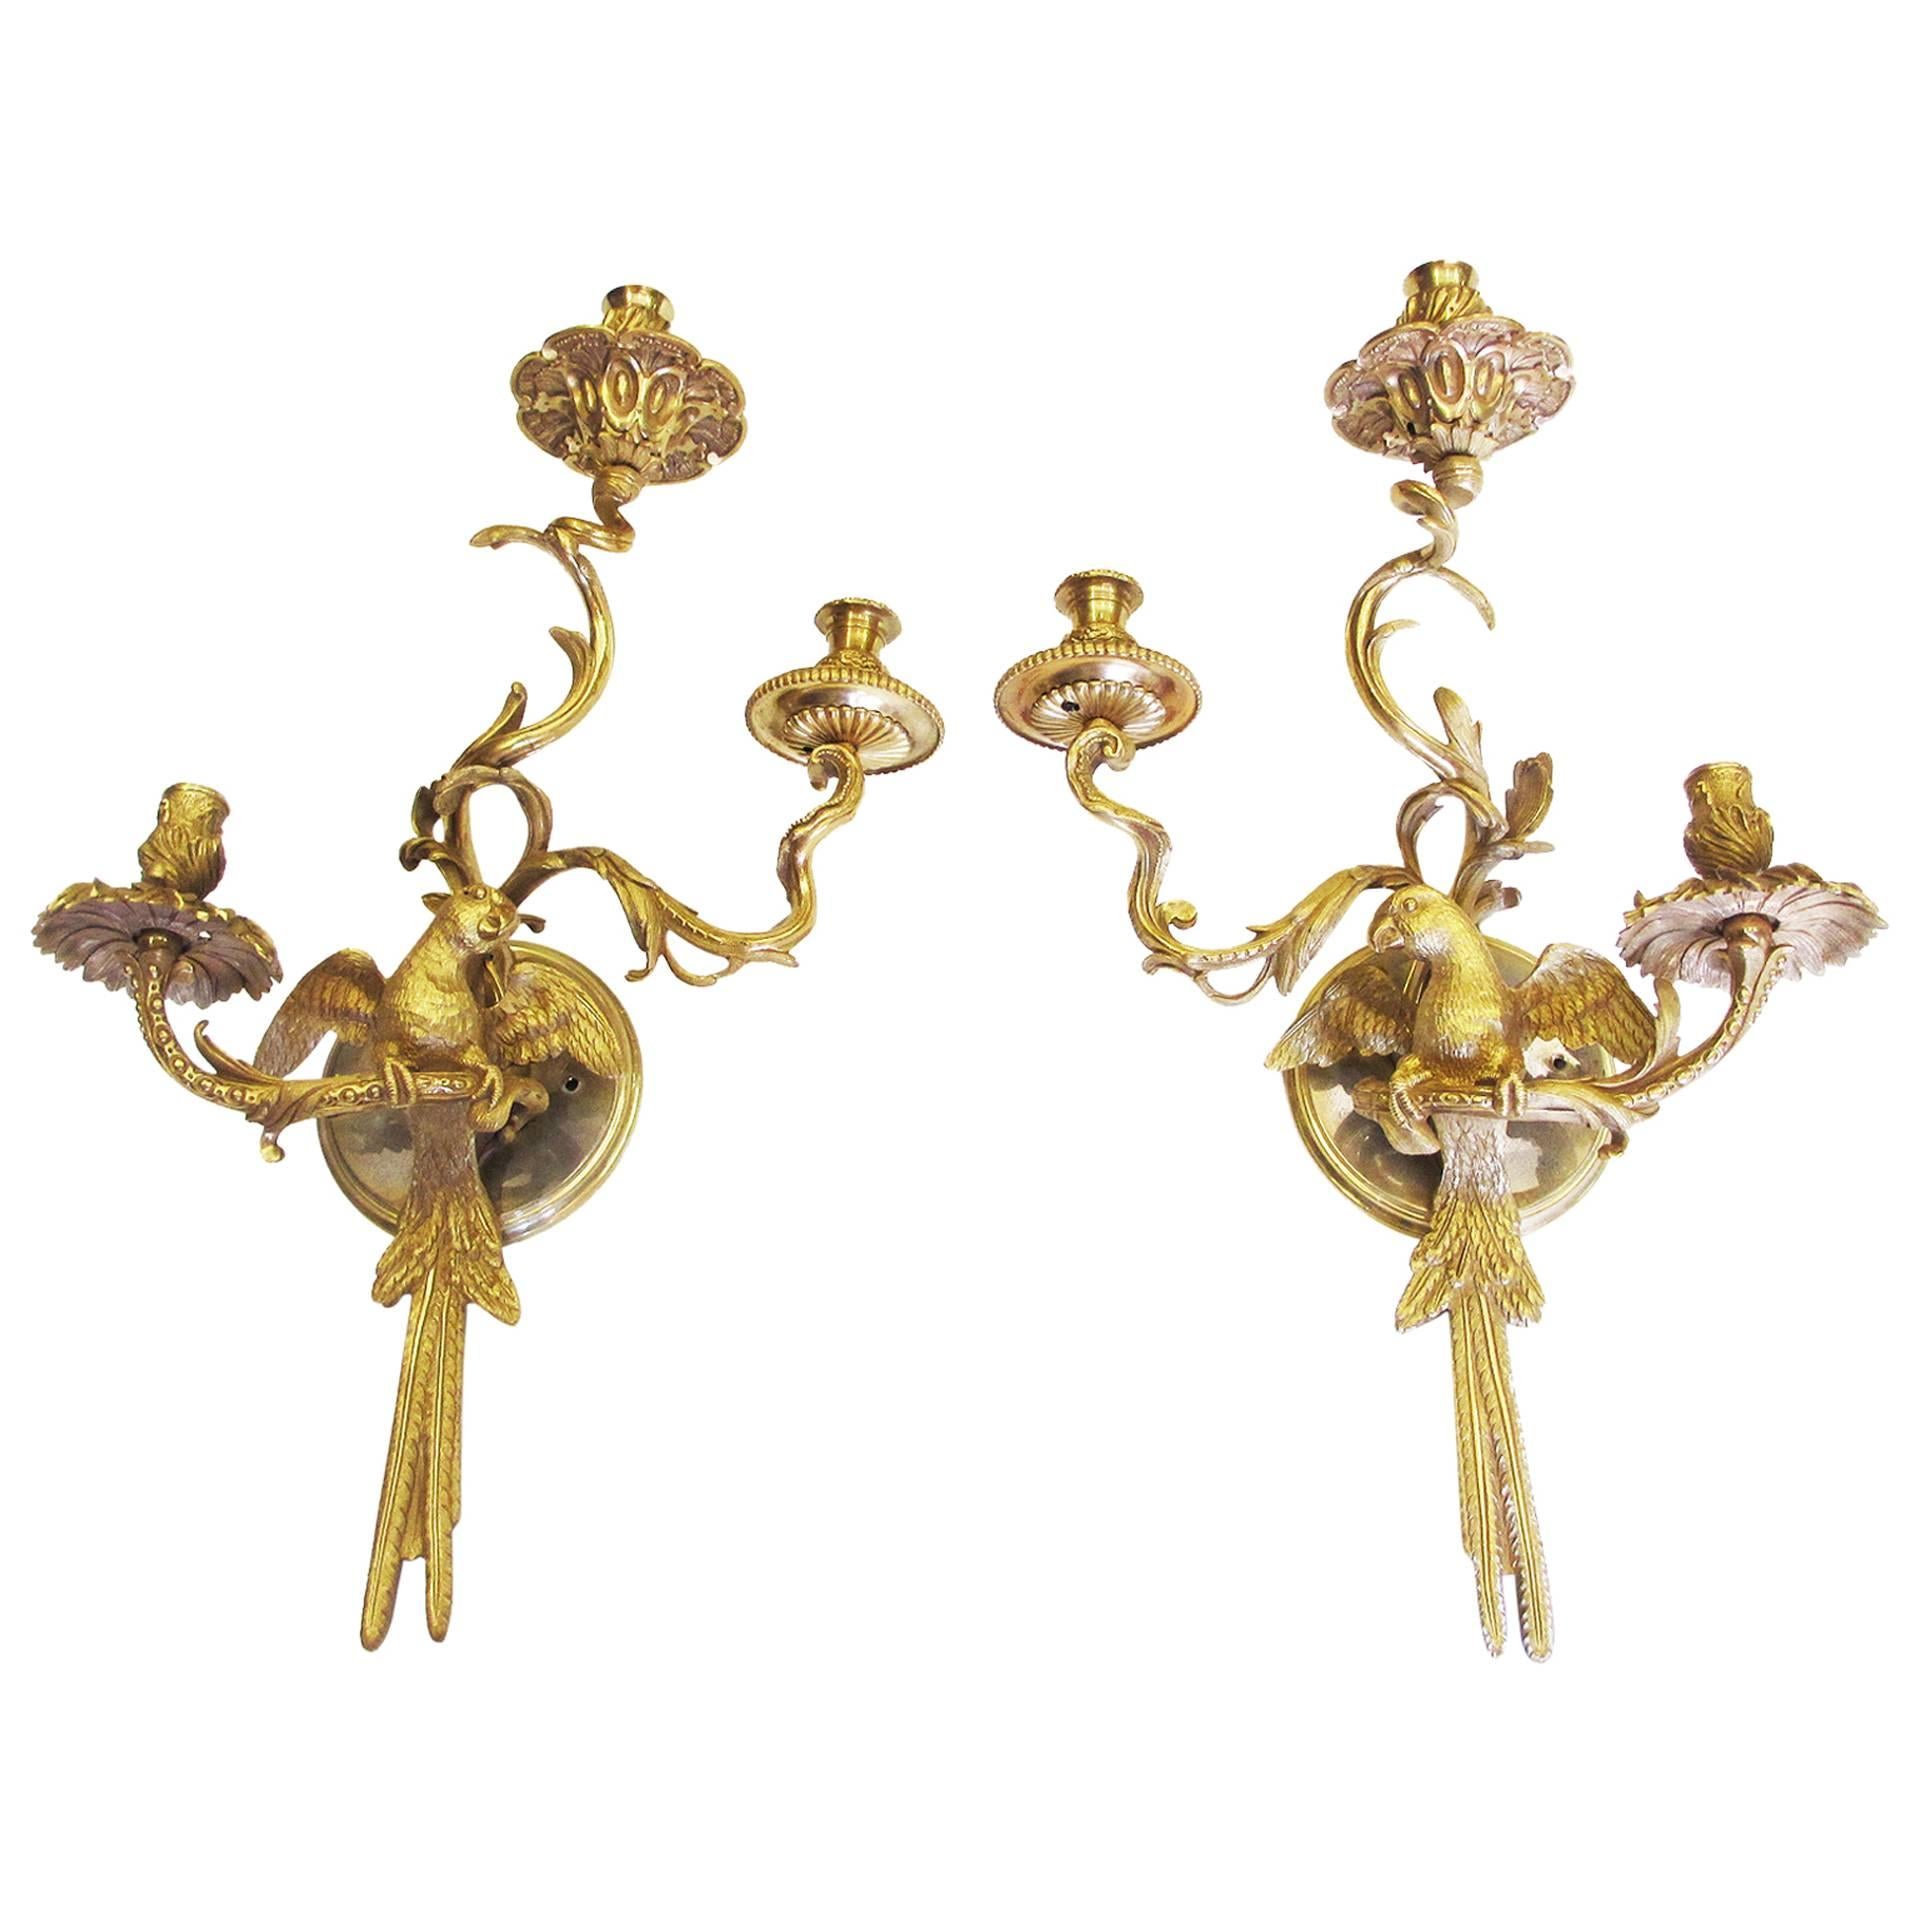 Pair of French 20th Century Louis XV Style Wall Lights from the Spelling Manor